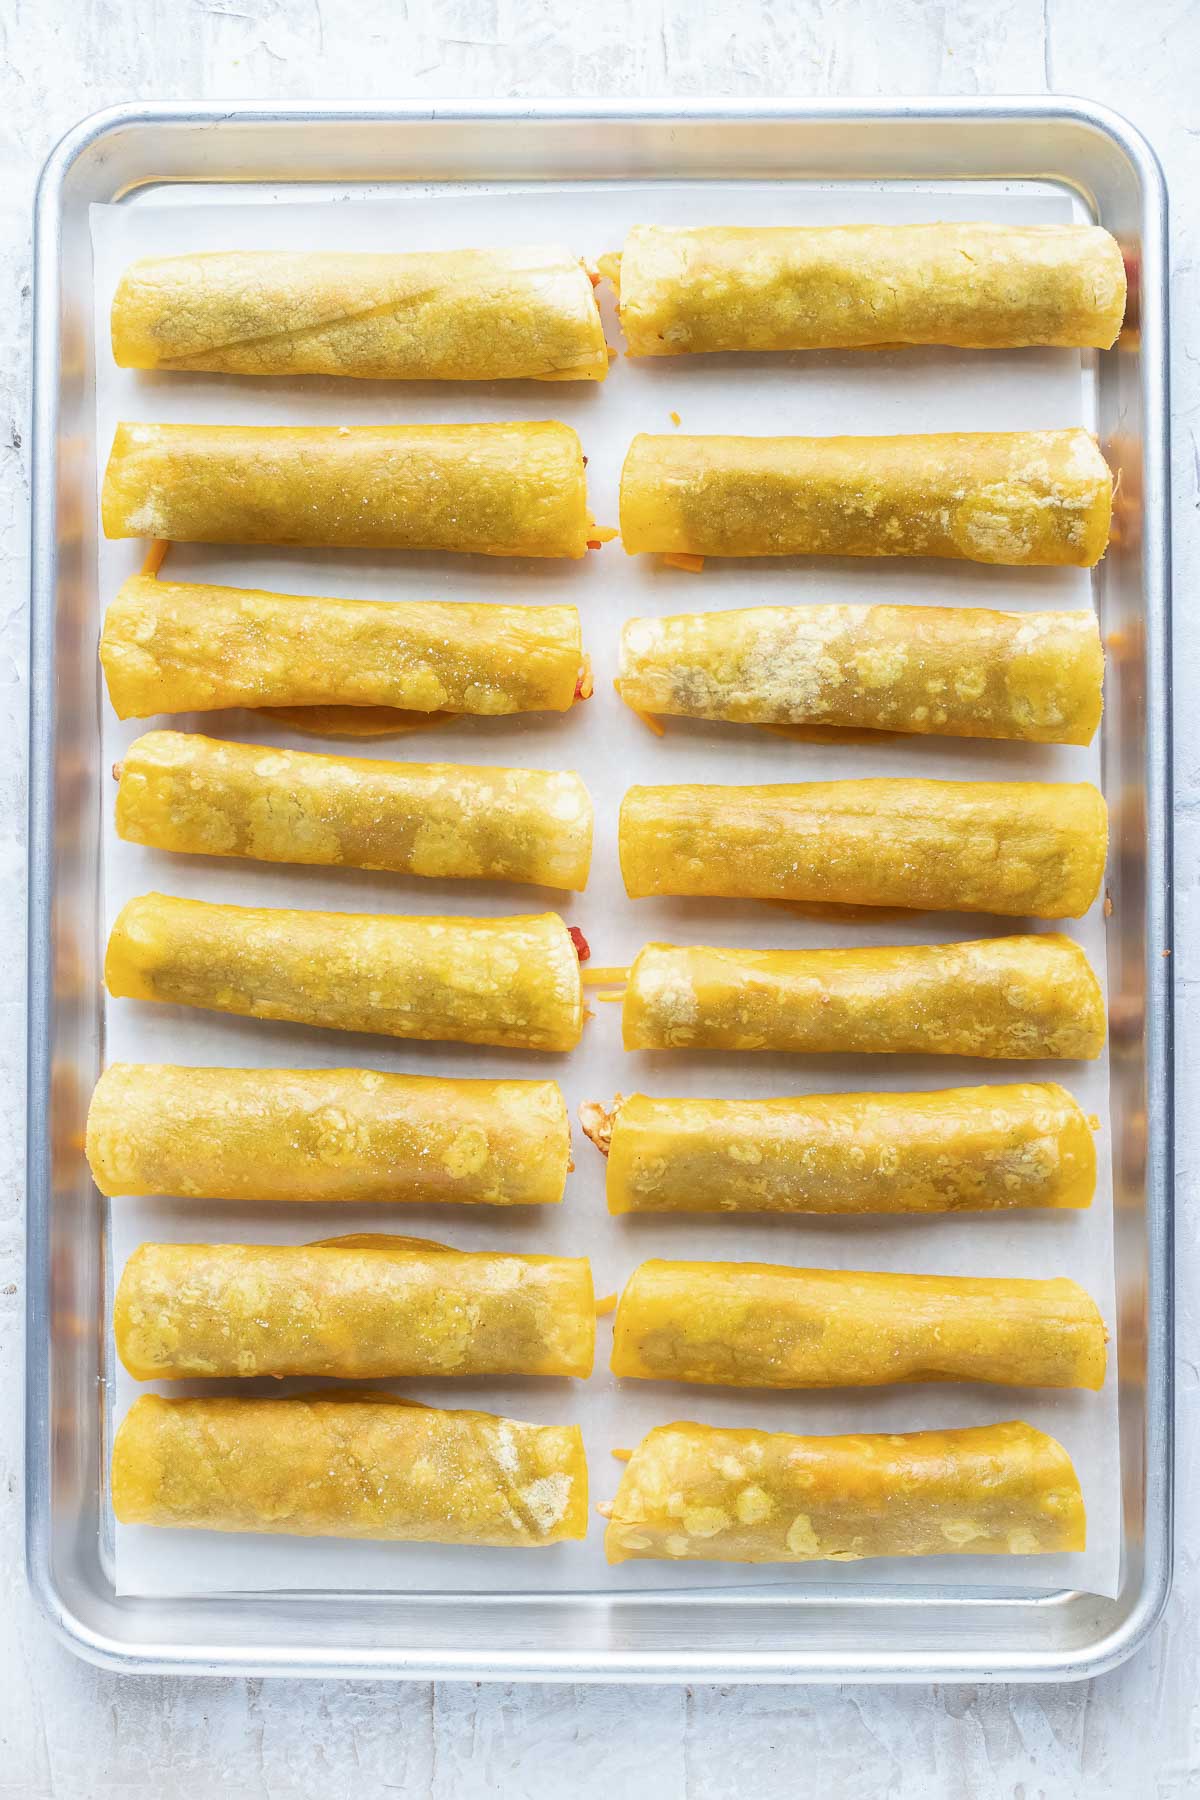 Sixteen taquitos rolled up and placed seam side down on a parchment paper lined baking sheet.